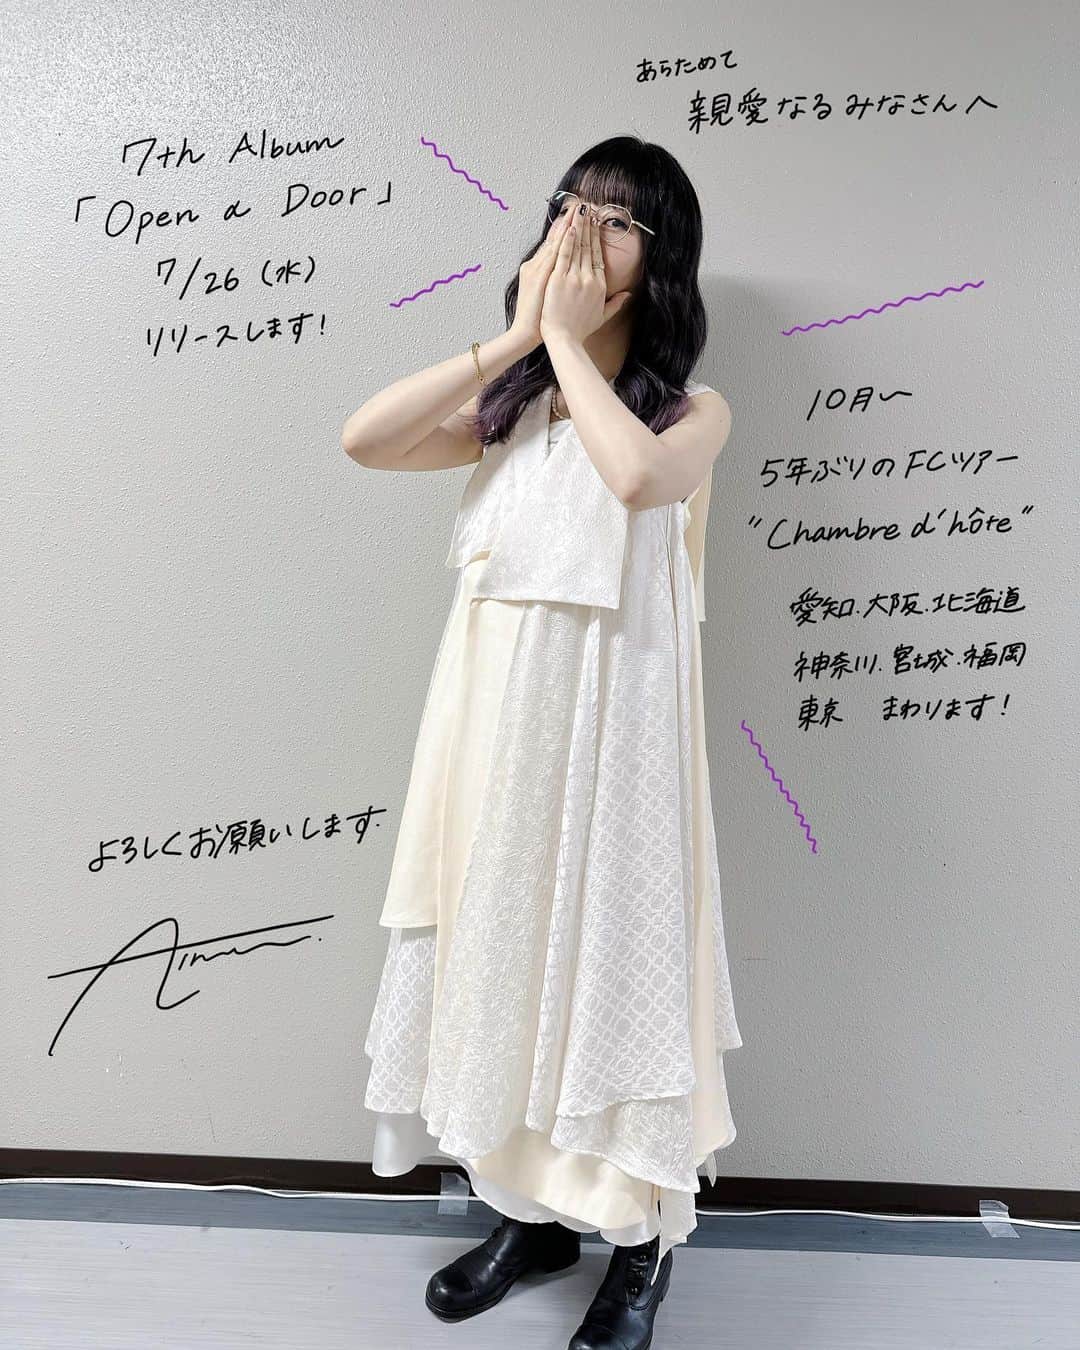 Aimerのインスタグラム：「⚯̫  I'll release my 7th album “Open α Door” on July 26th! And my fan club tour will start from October ♡ For more information, please check my website!」